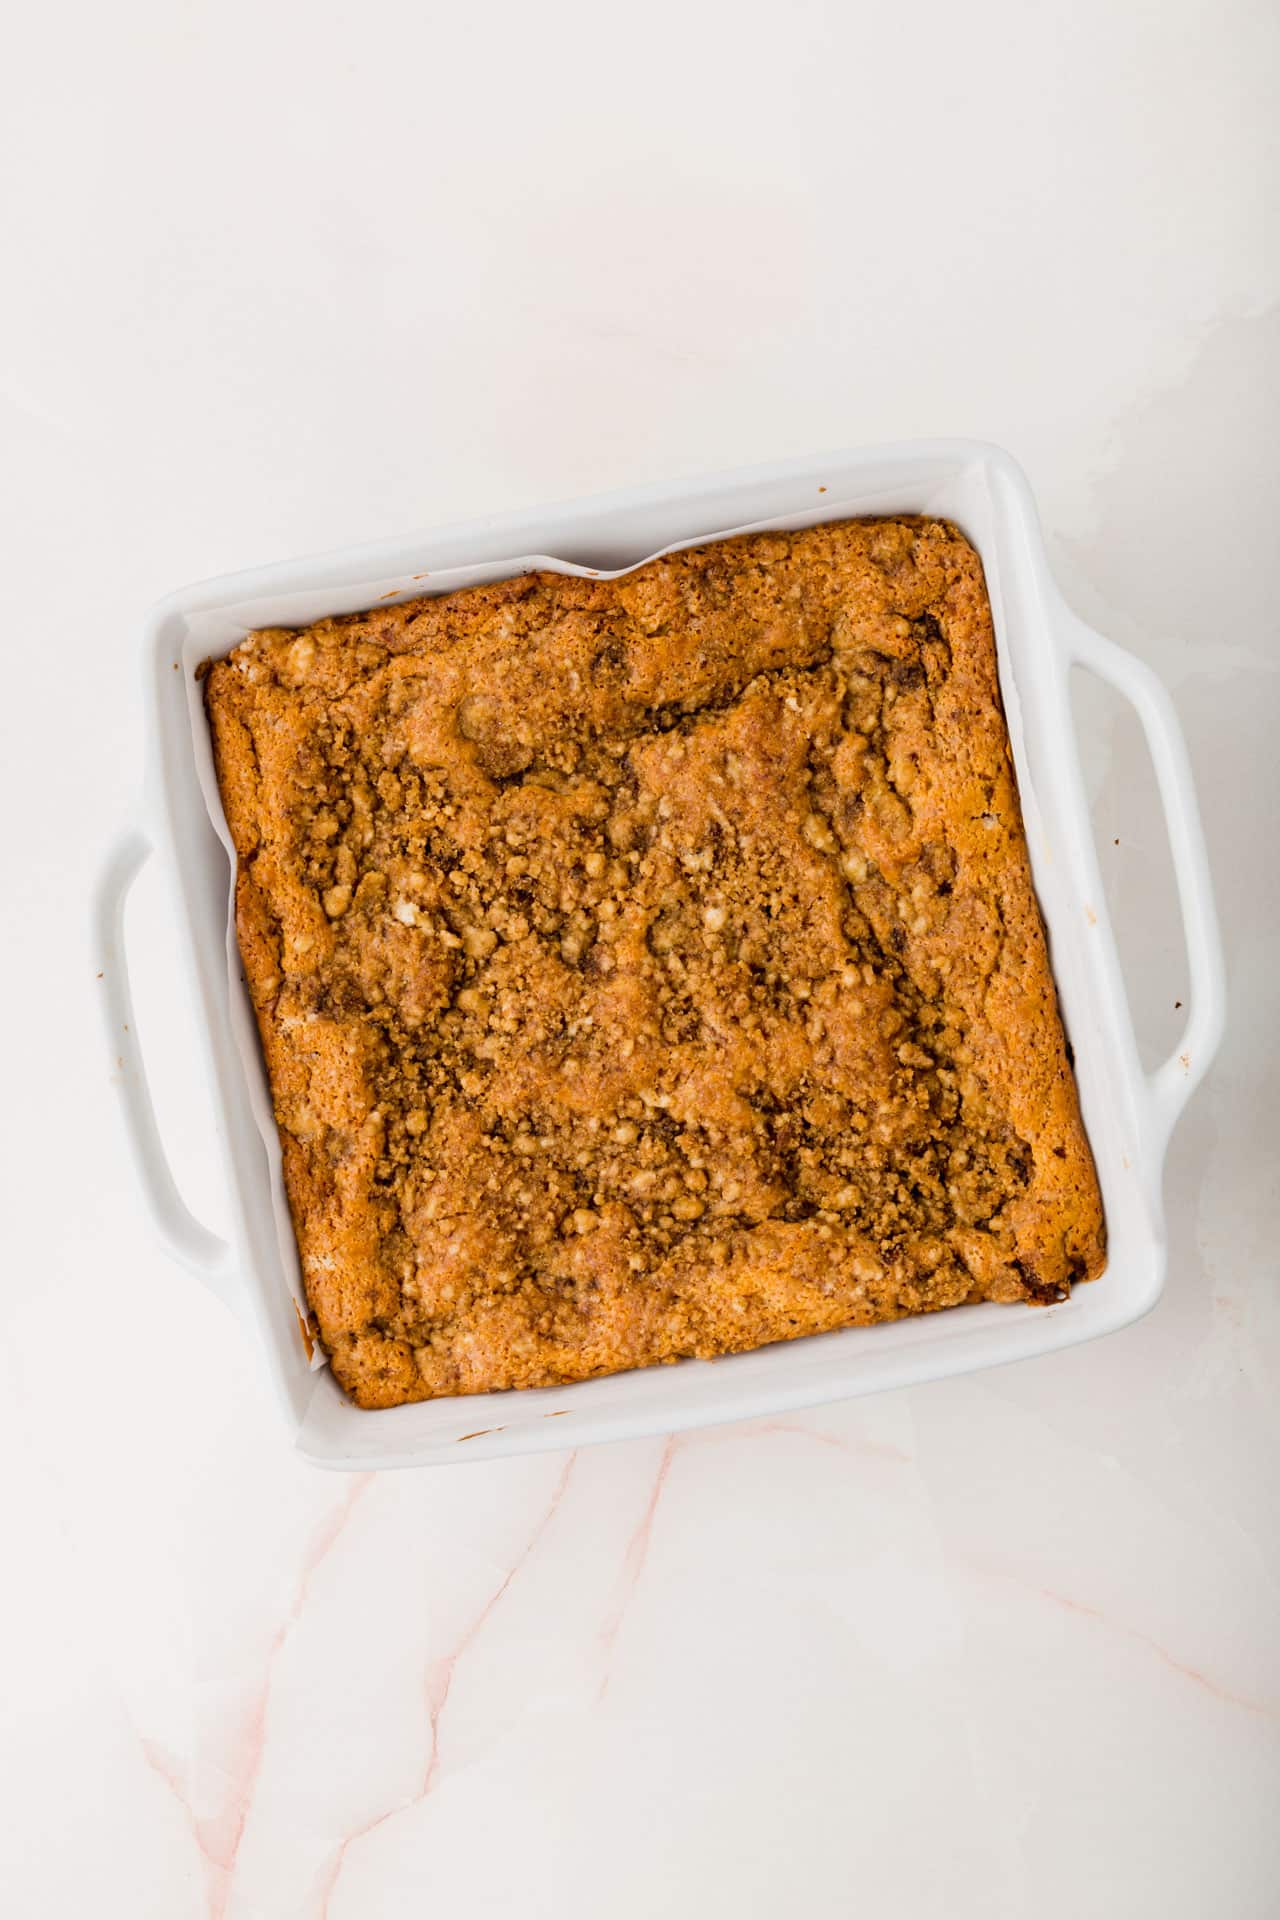 A square baking dish filled with a gluten-free coffee cake with streusel.